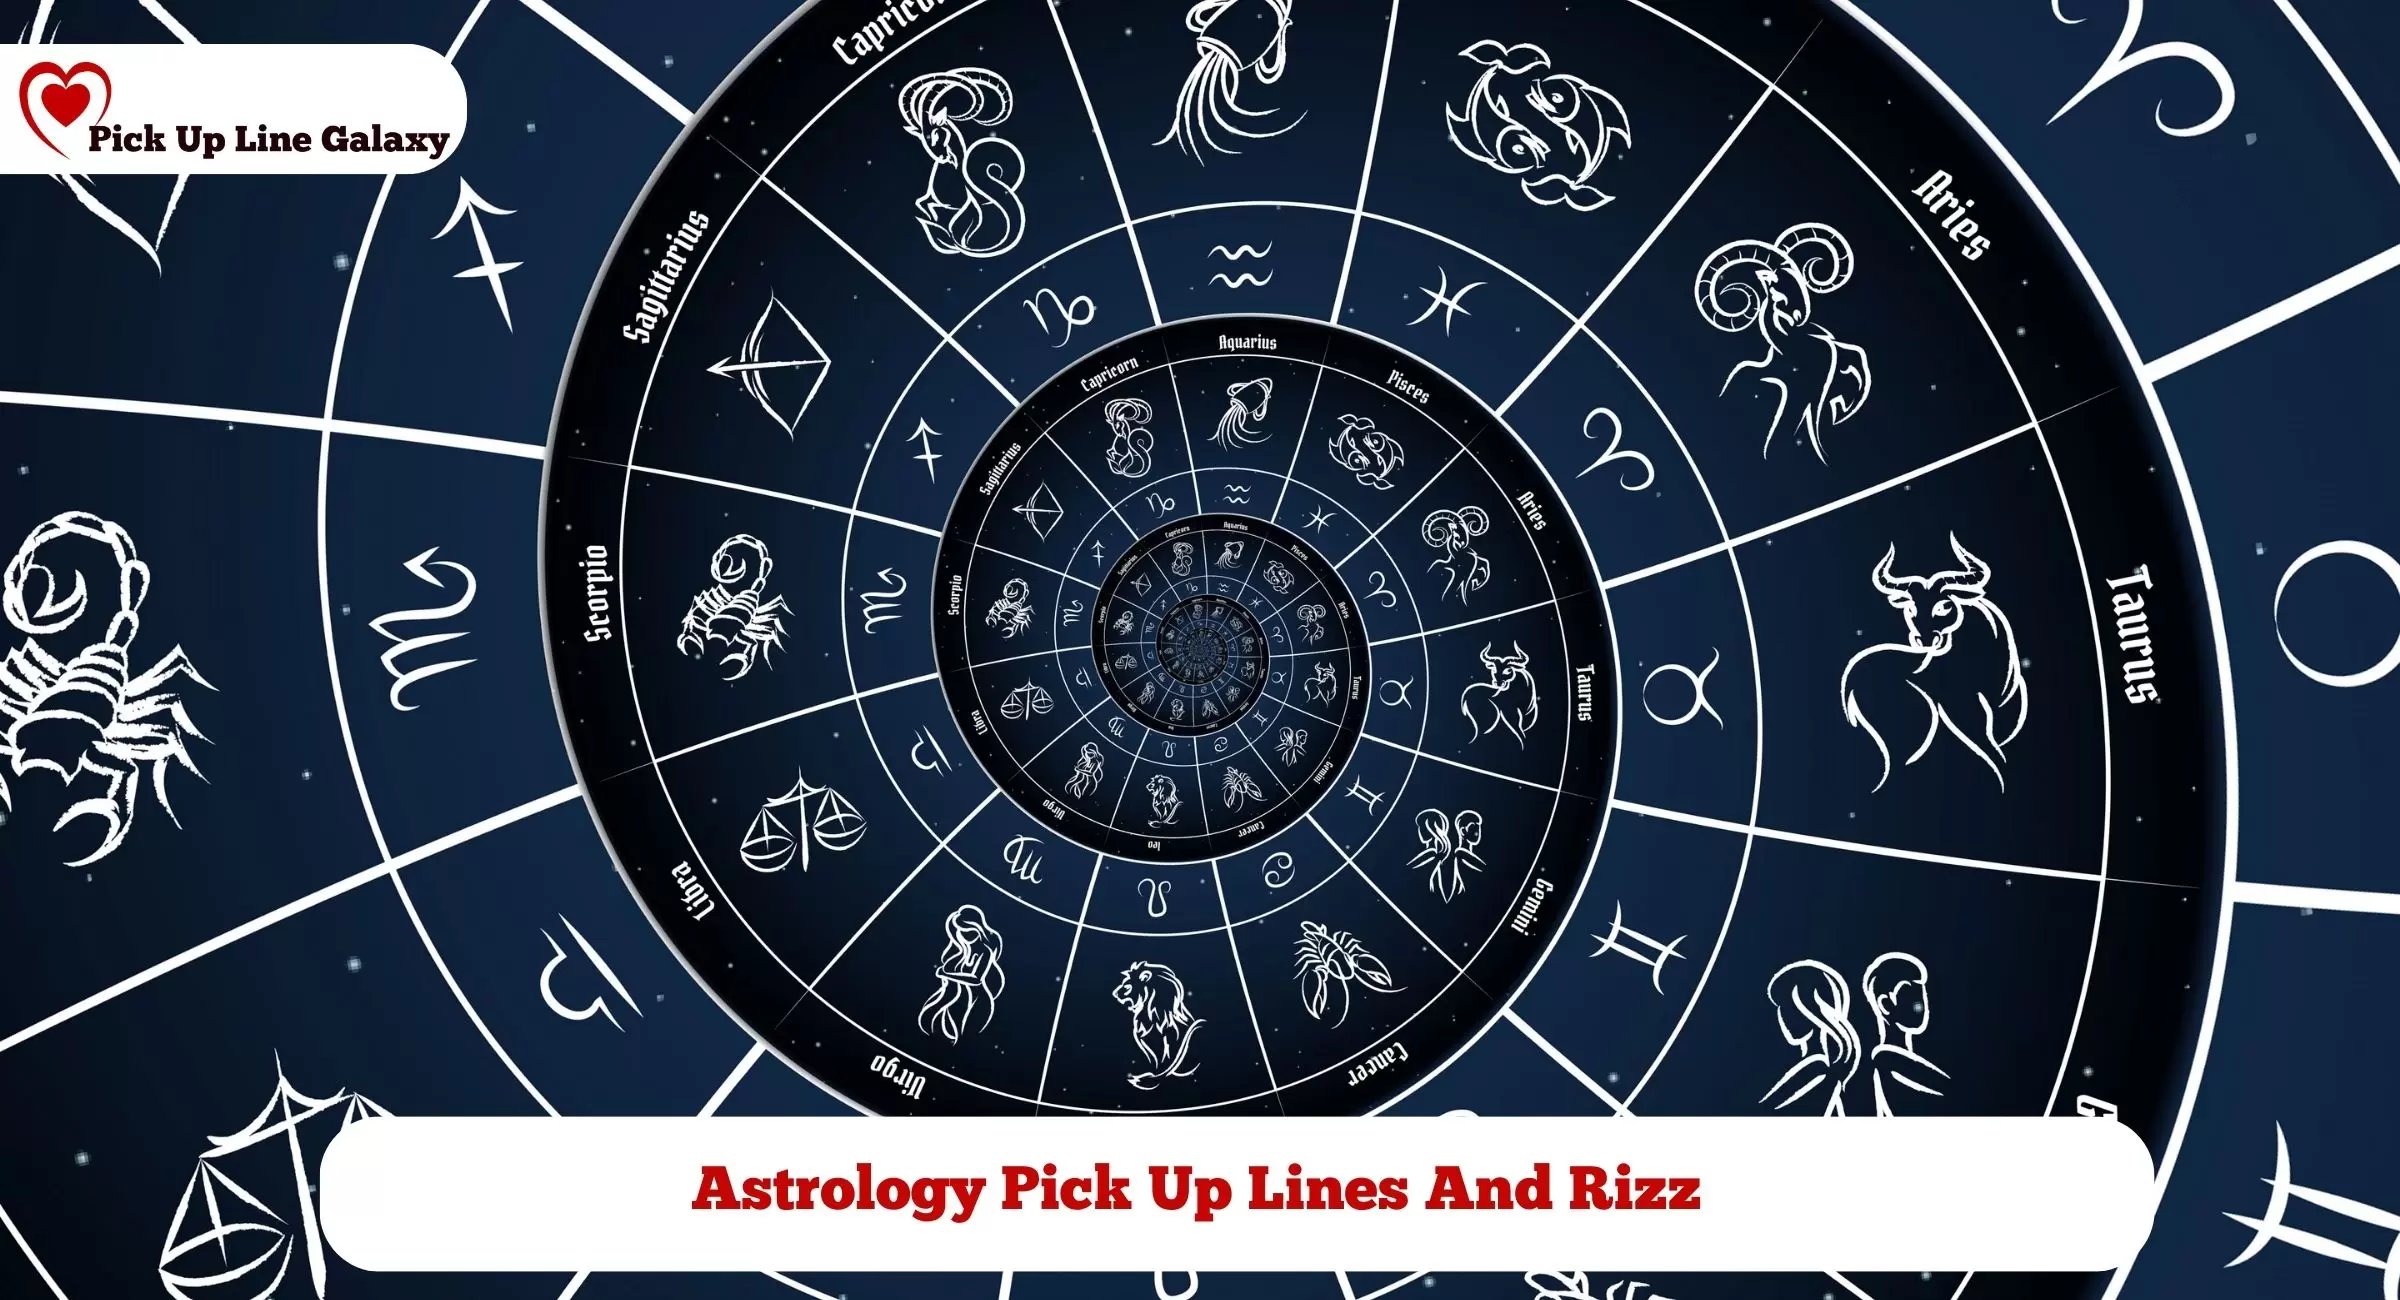 Astrology Pick Up Lines And Rizz